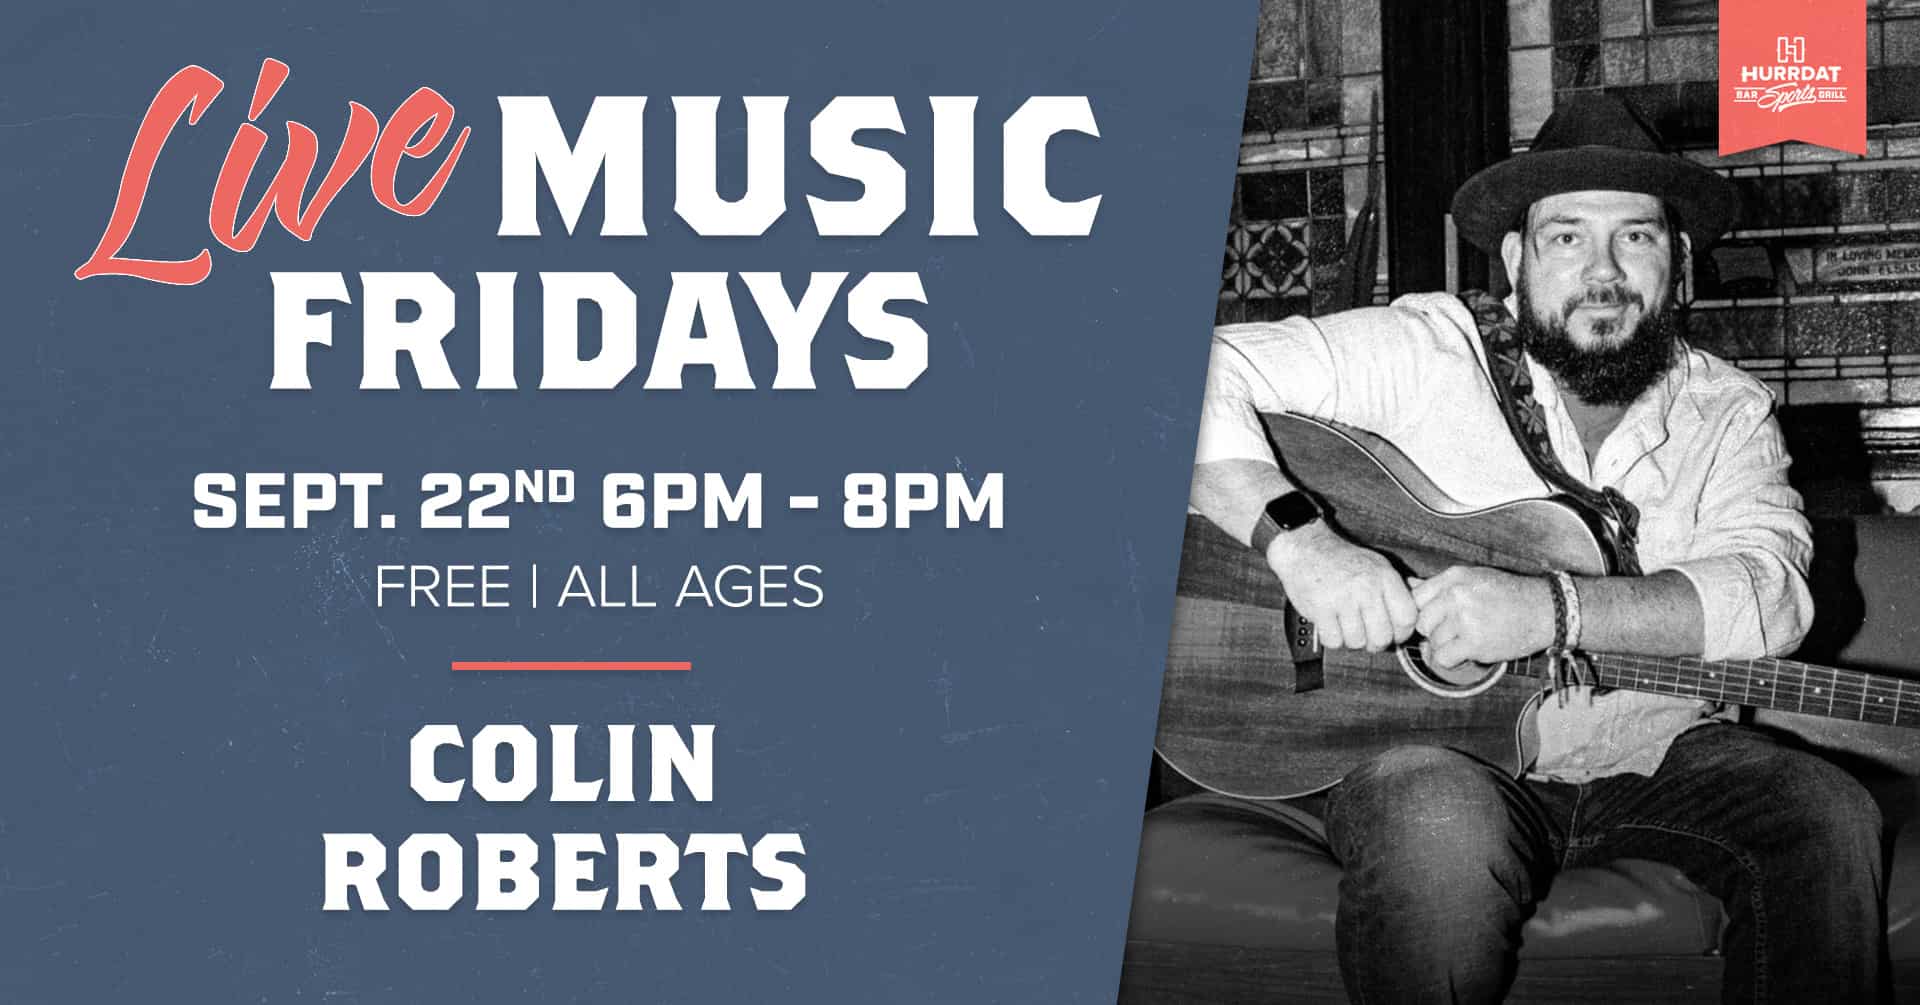 Colin Roberts Live Music Friday